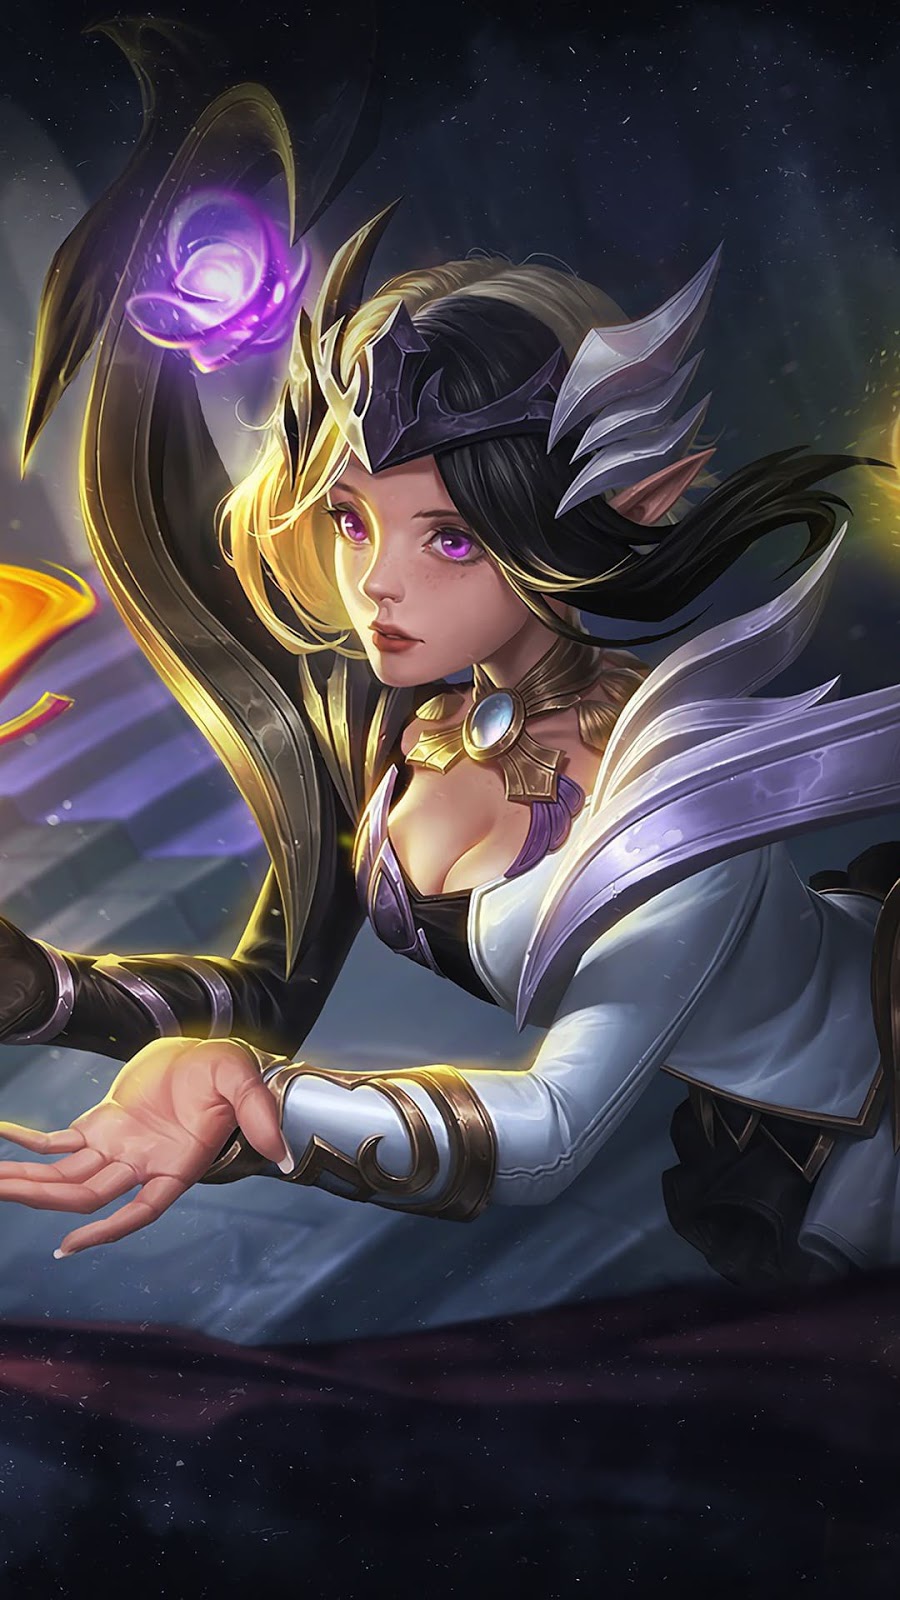 15+ Wallpaper Lunox Mobile Legends (ML) Full HD for PC, Android & iOS